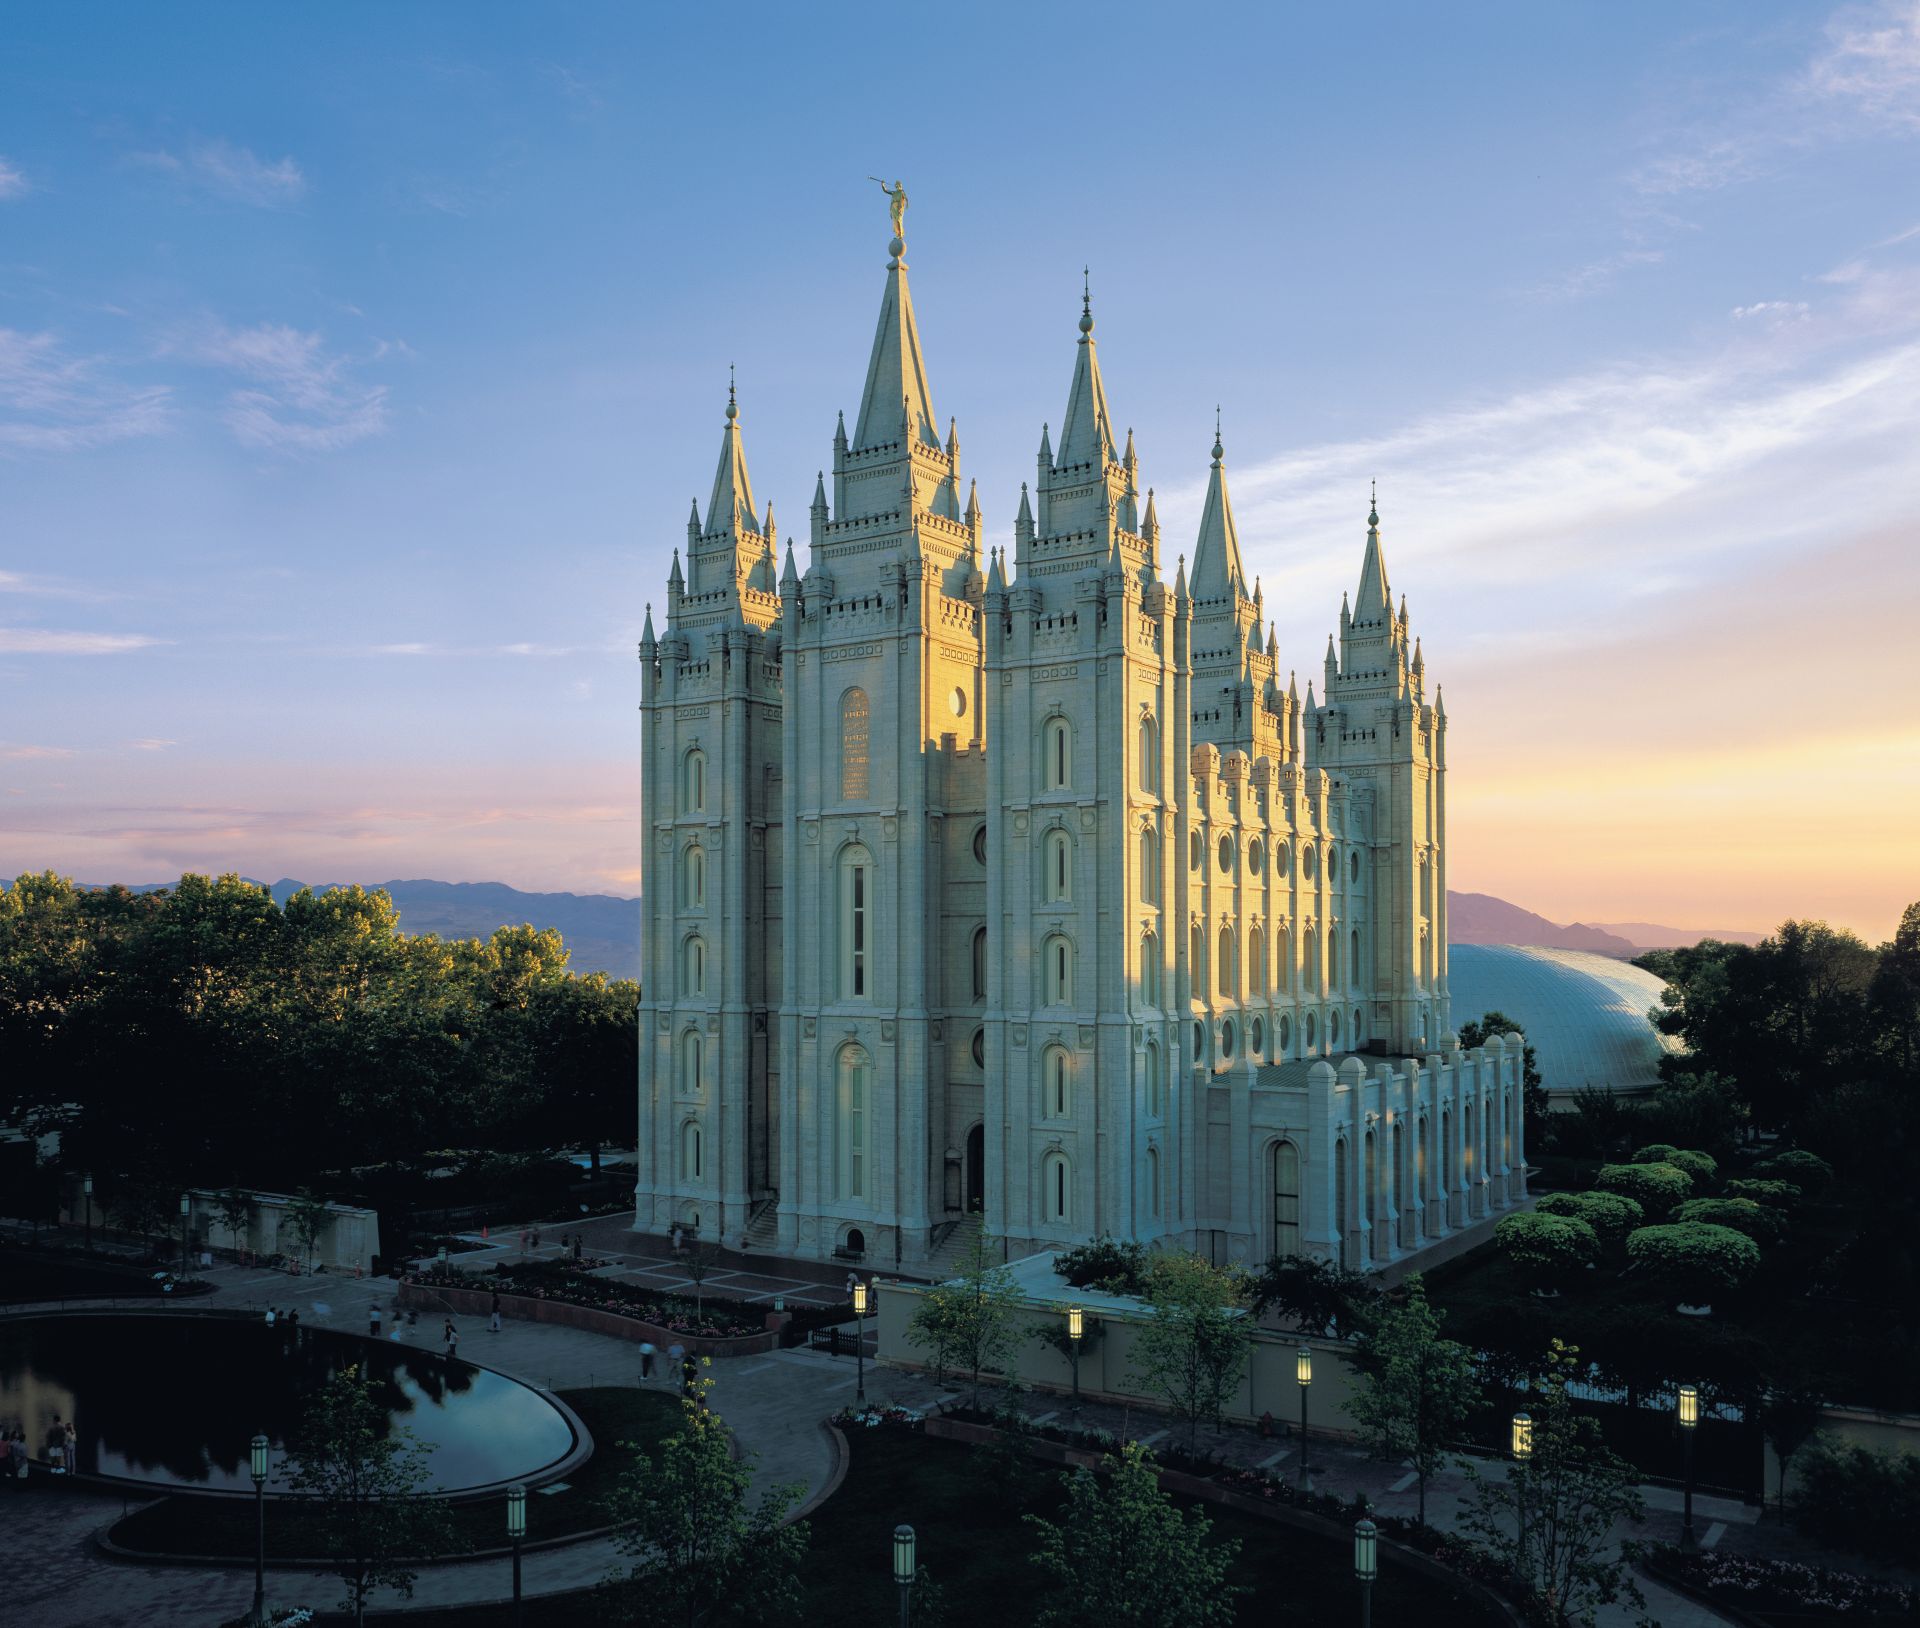 Salt Lake Temple—“Holiness to the Lord The House of the Lord”